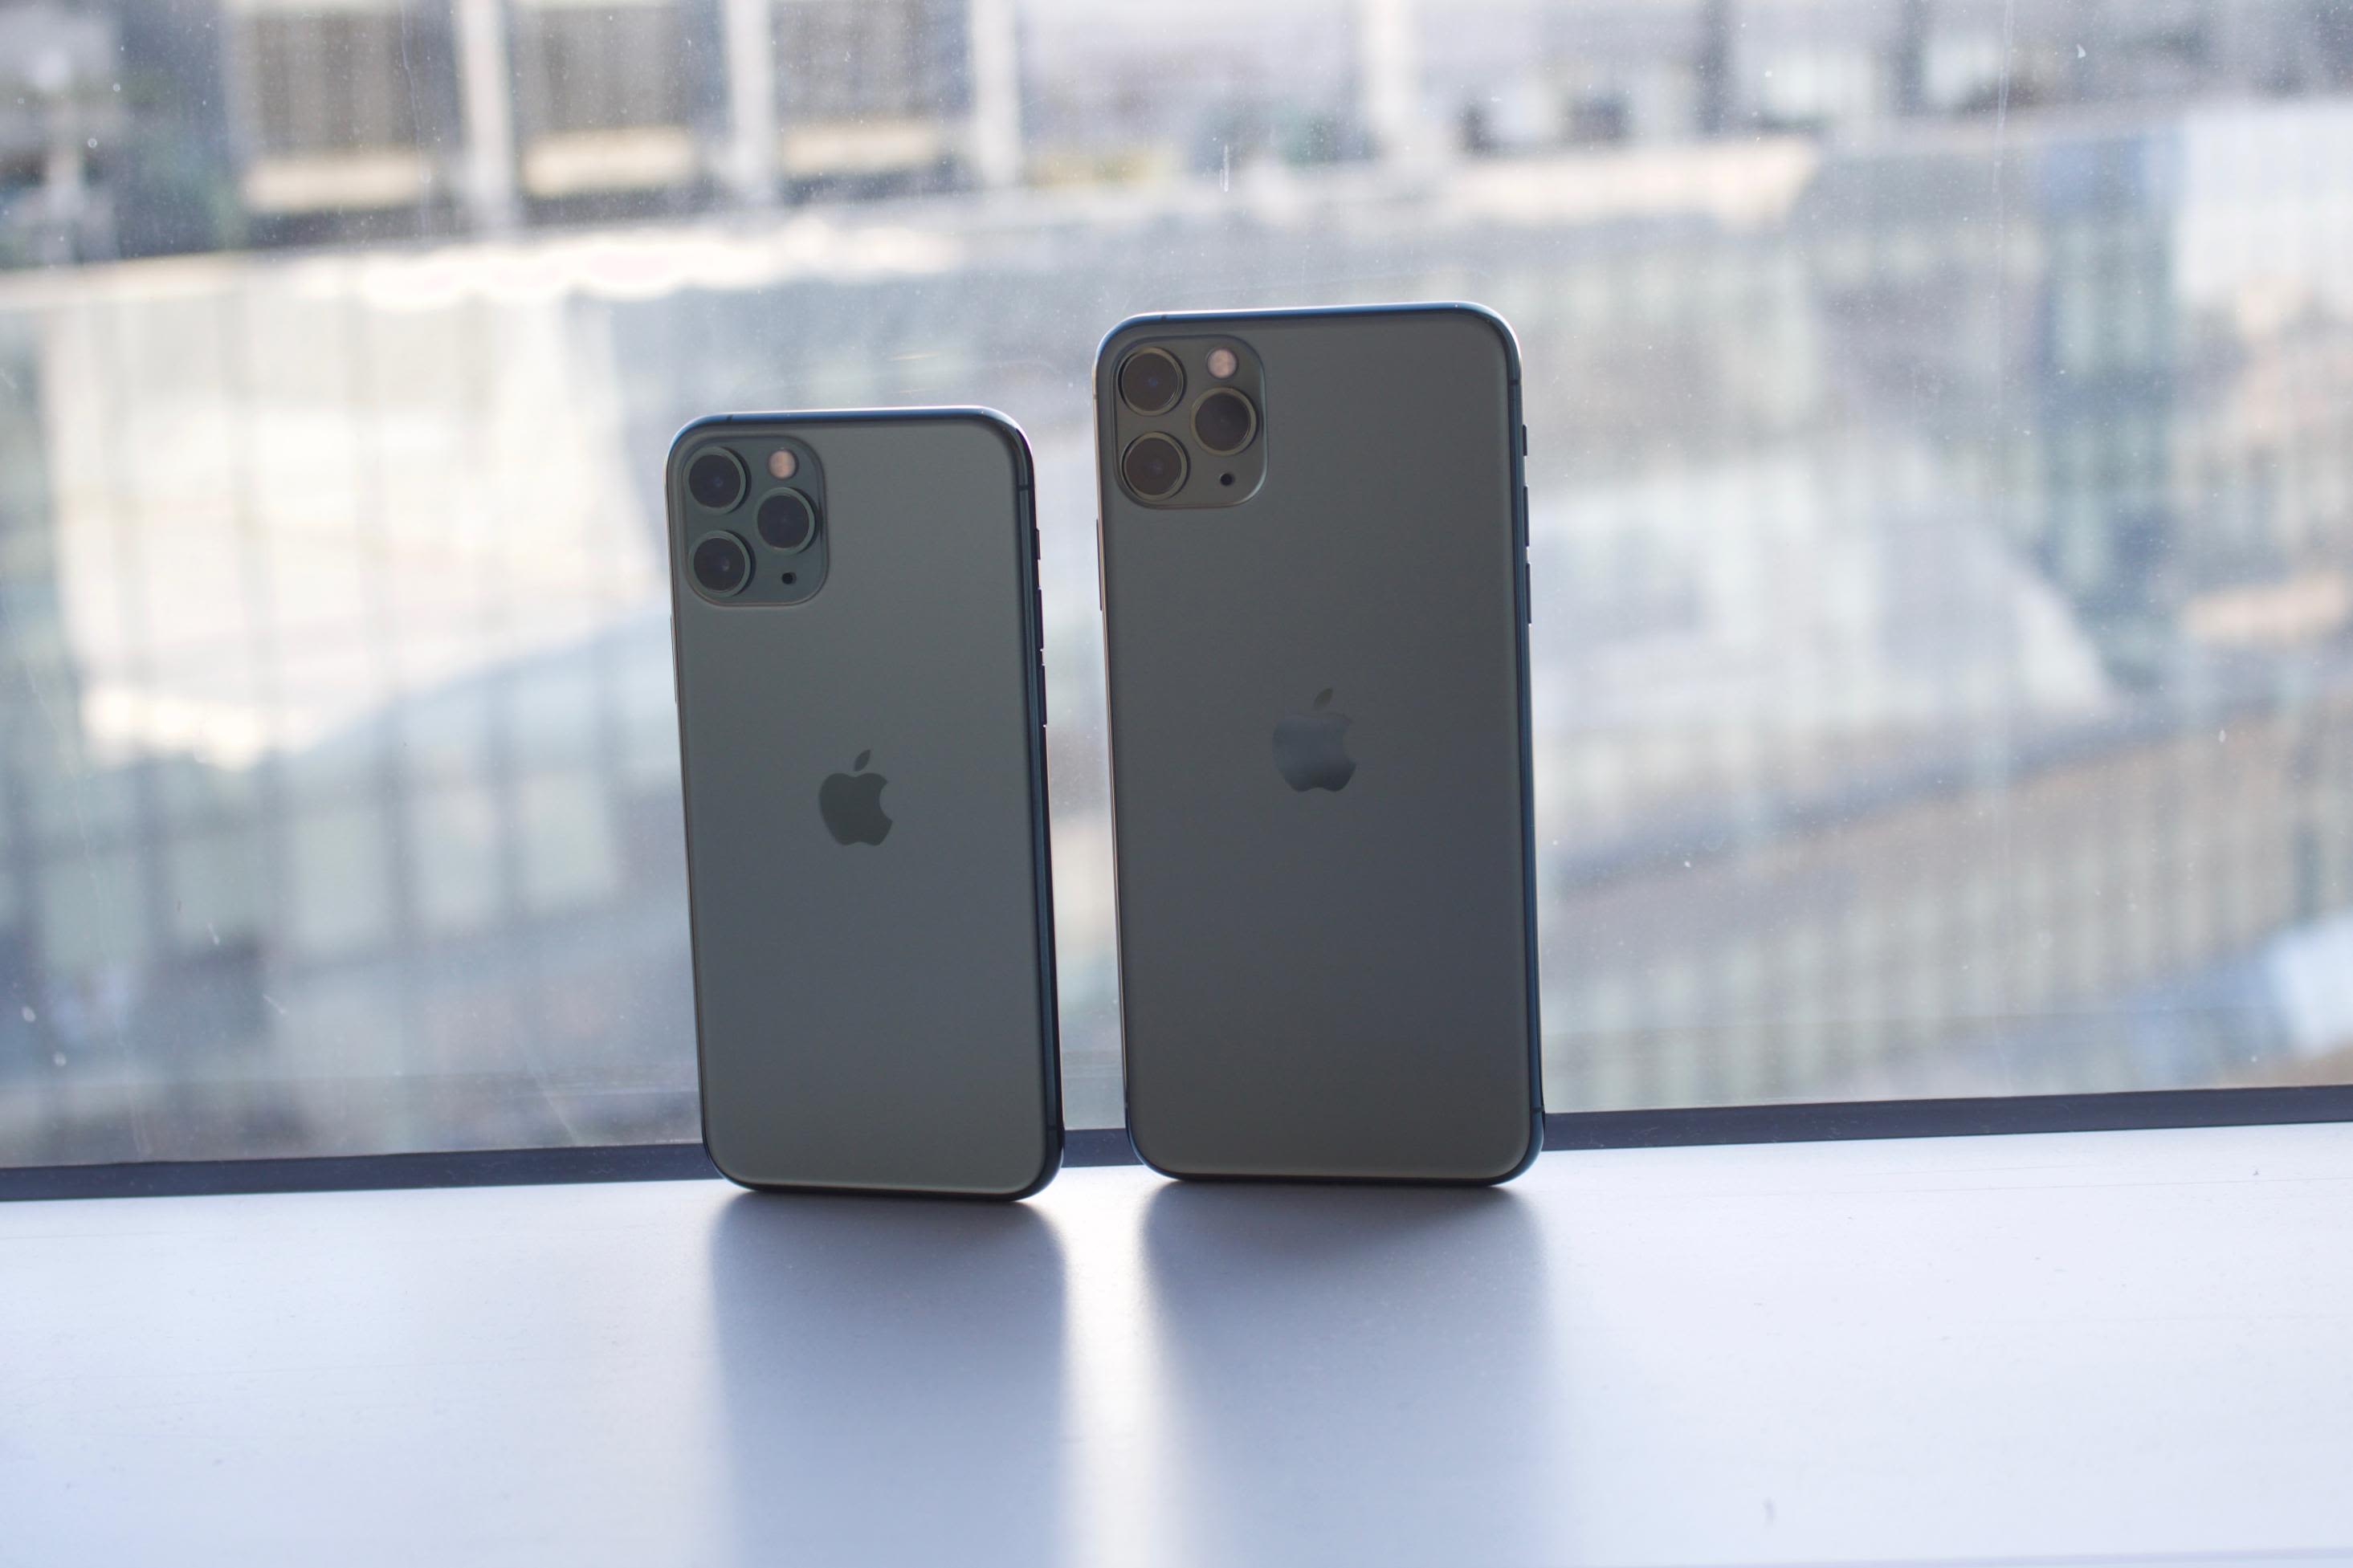 Apple iPhone 11 and iPhone 11 Pro Max: A summary of initial